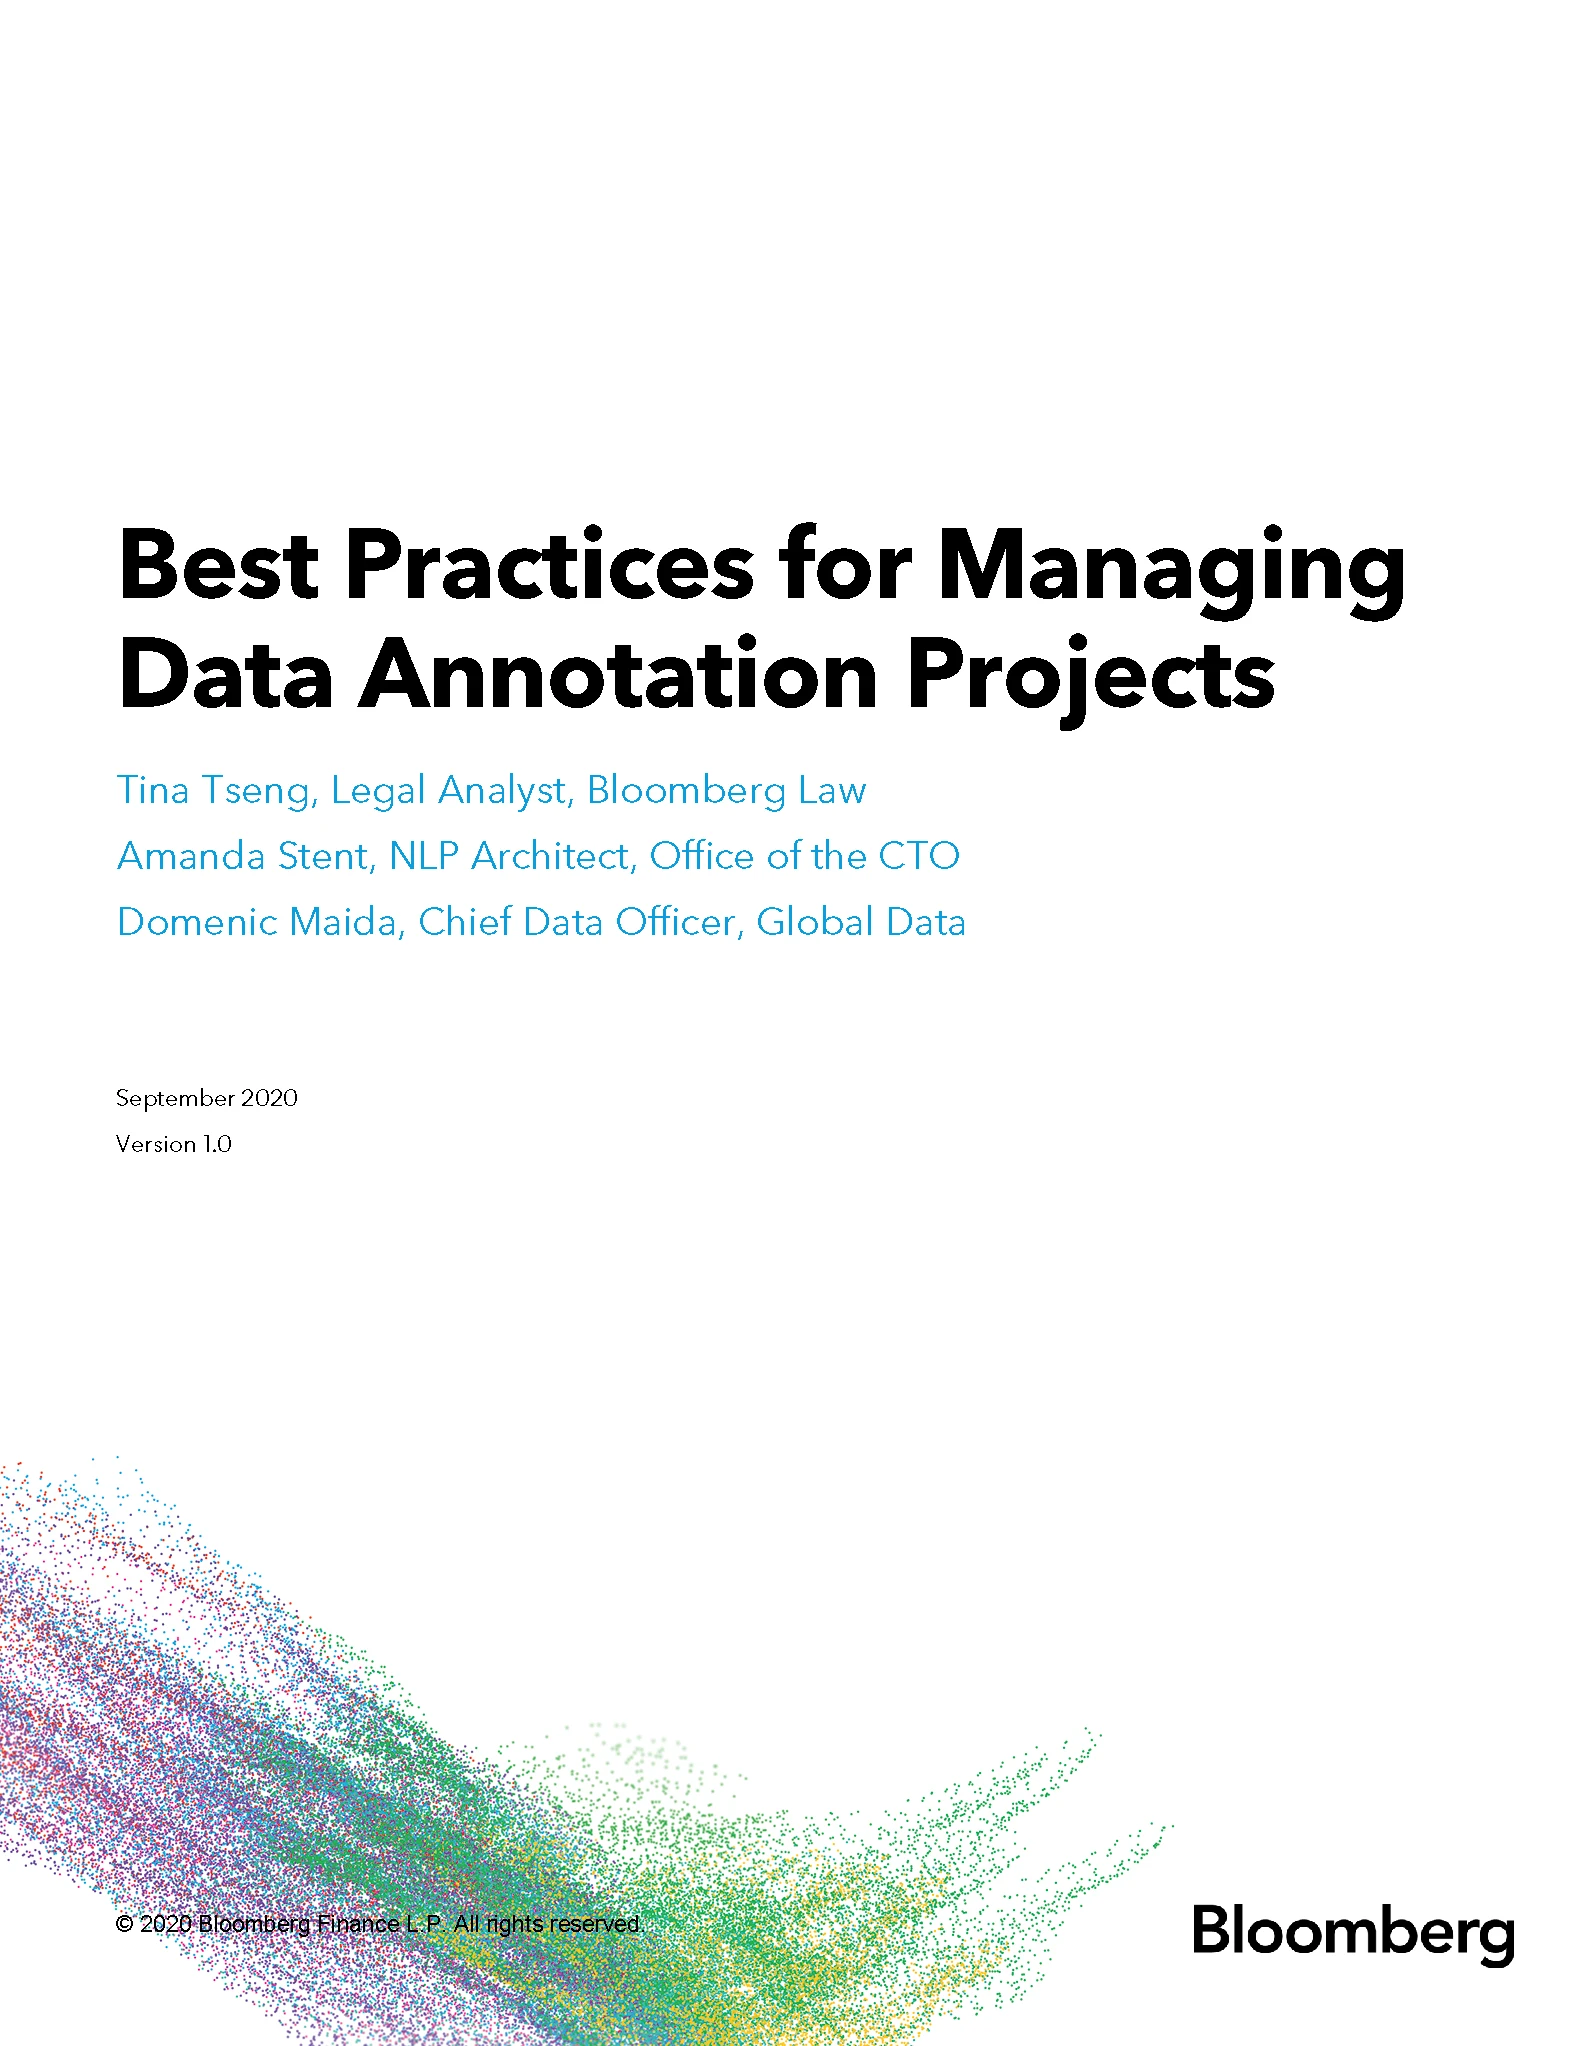 Best Practices for Managing Data Annotation Projects